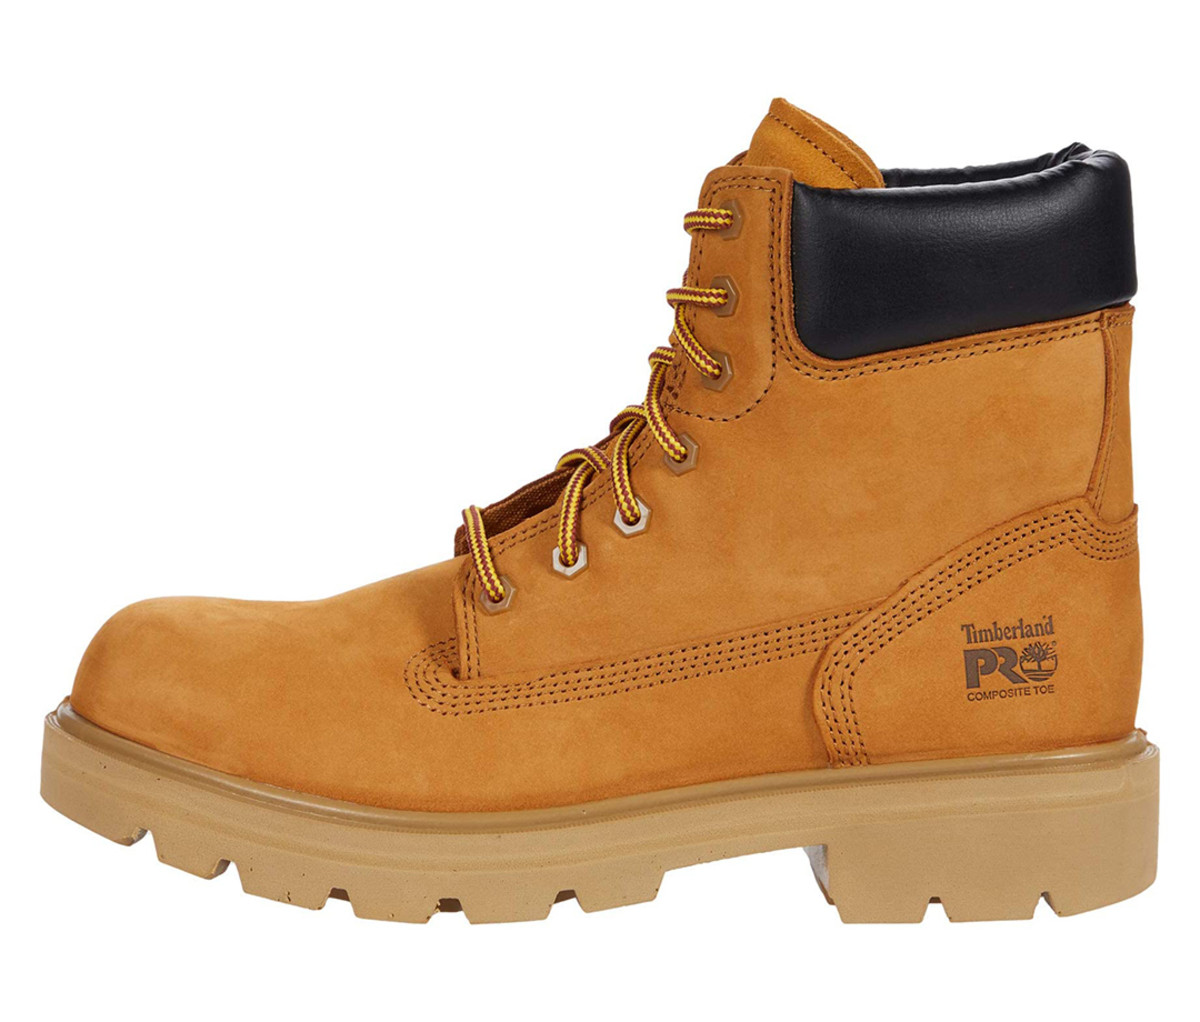 Timberland PRO Sawhorse 6" Composite Safety Toe Boots